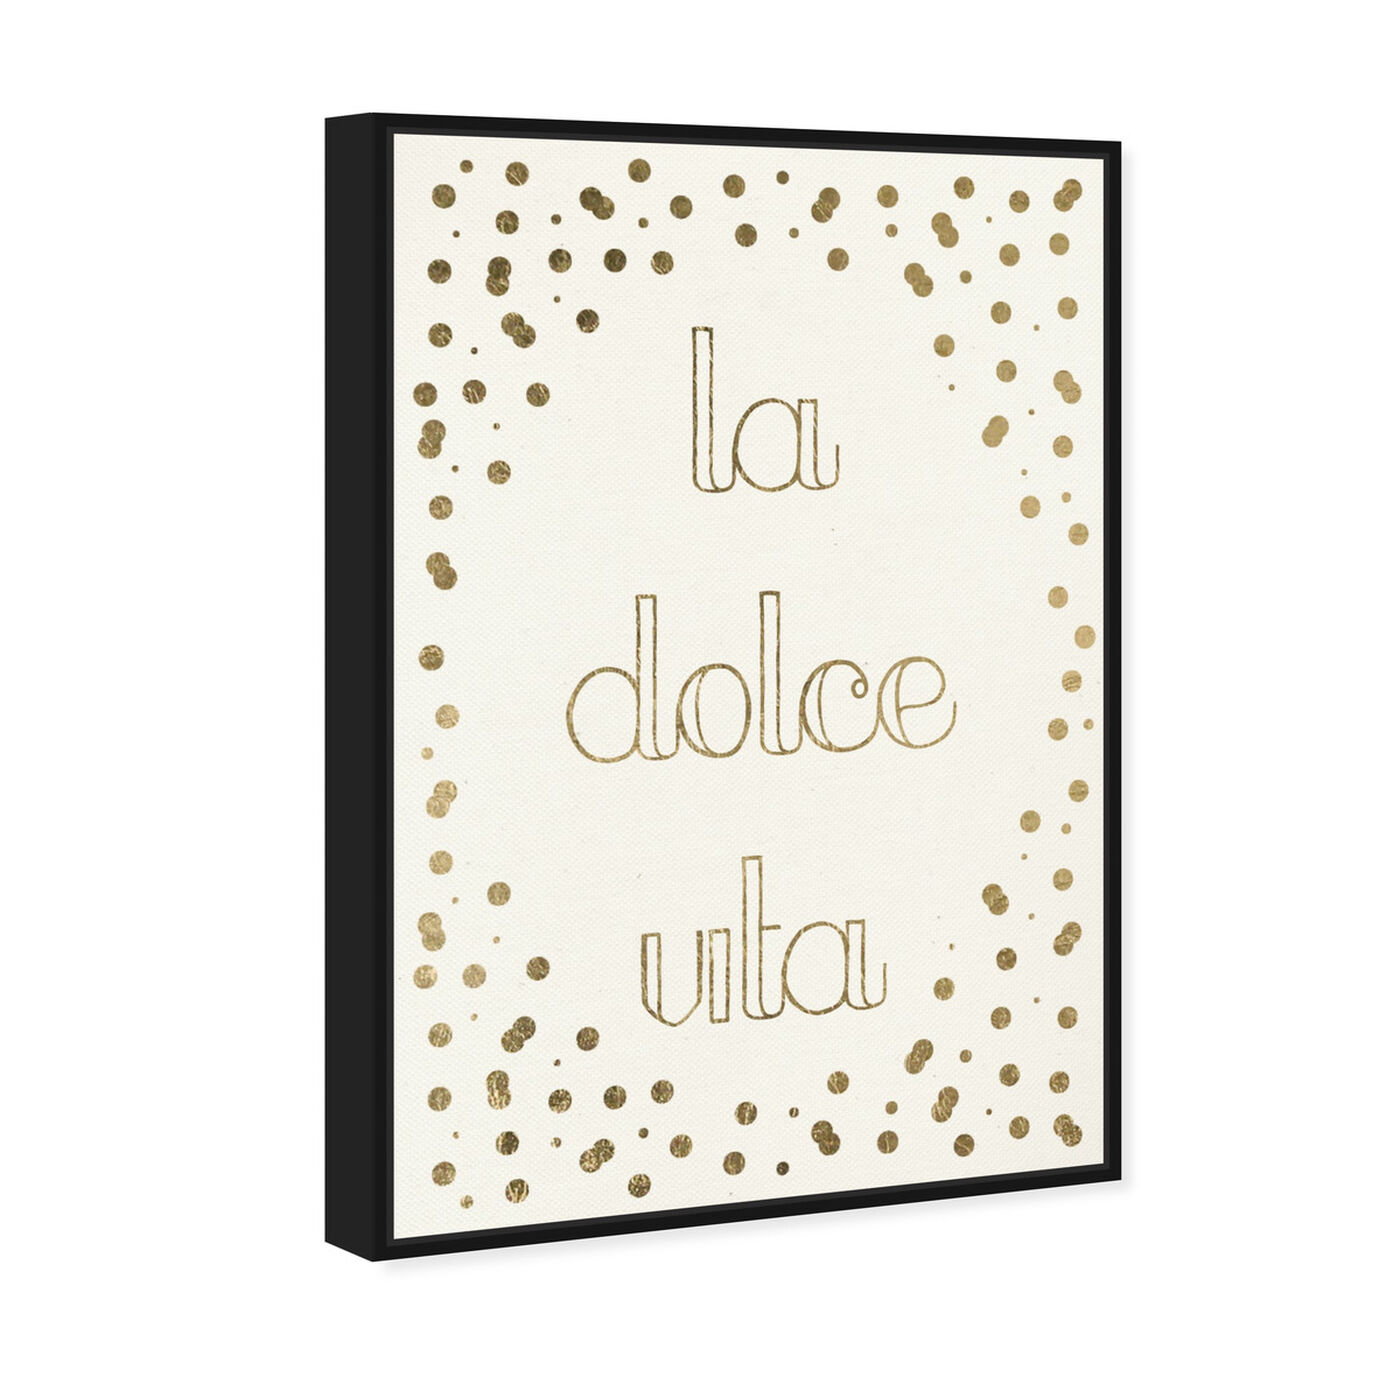 Angled view of Dolce Vita II featuring typography and quotes and inspirational quotes and sayings art.